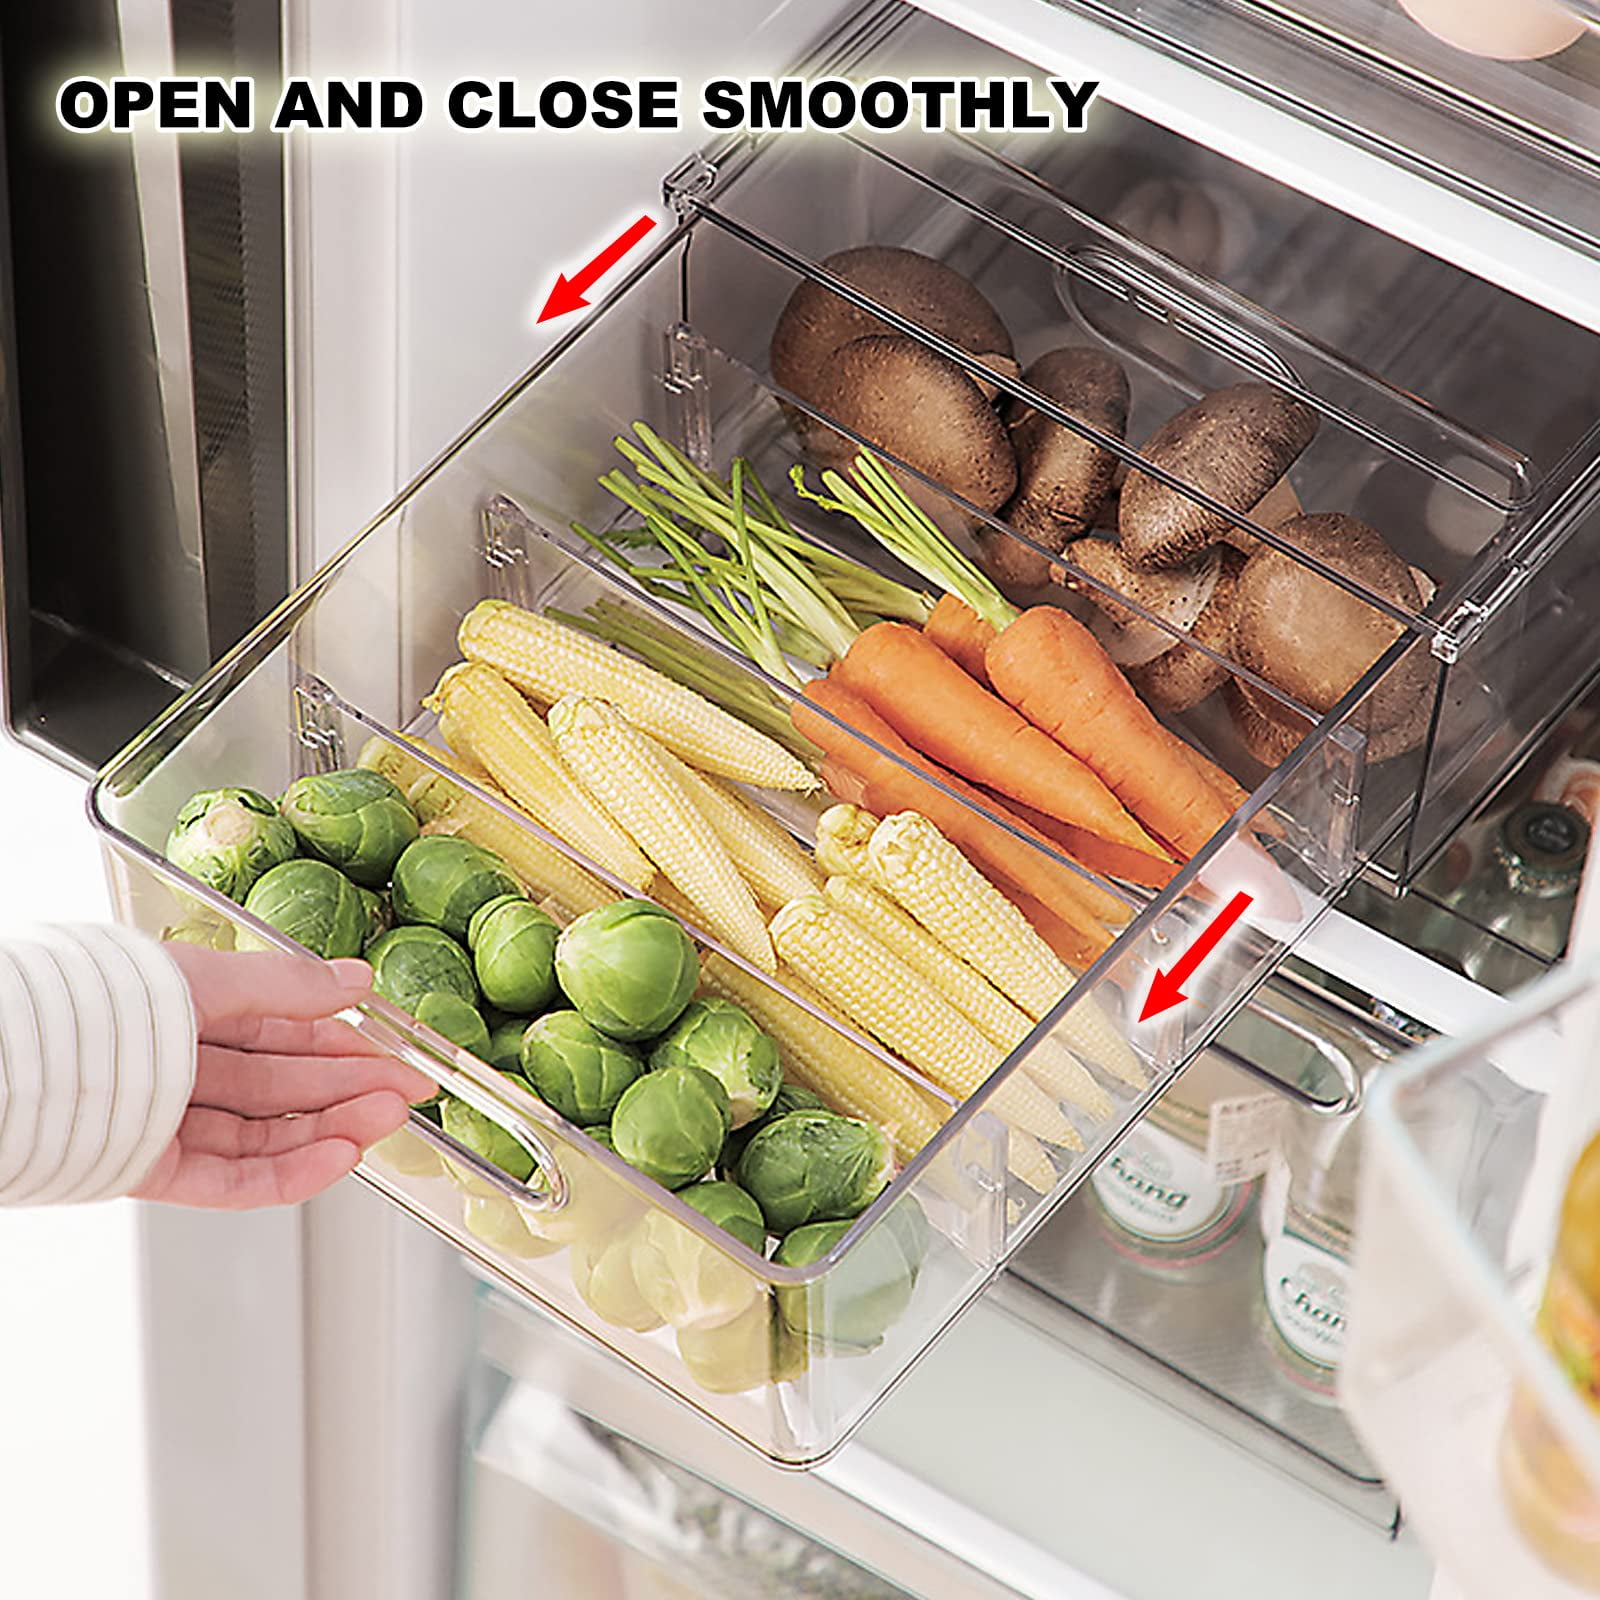 Ornafort 2Pack Refrigerator Organizer Bins with Pull Out Drawers